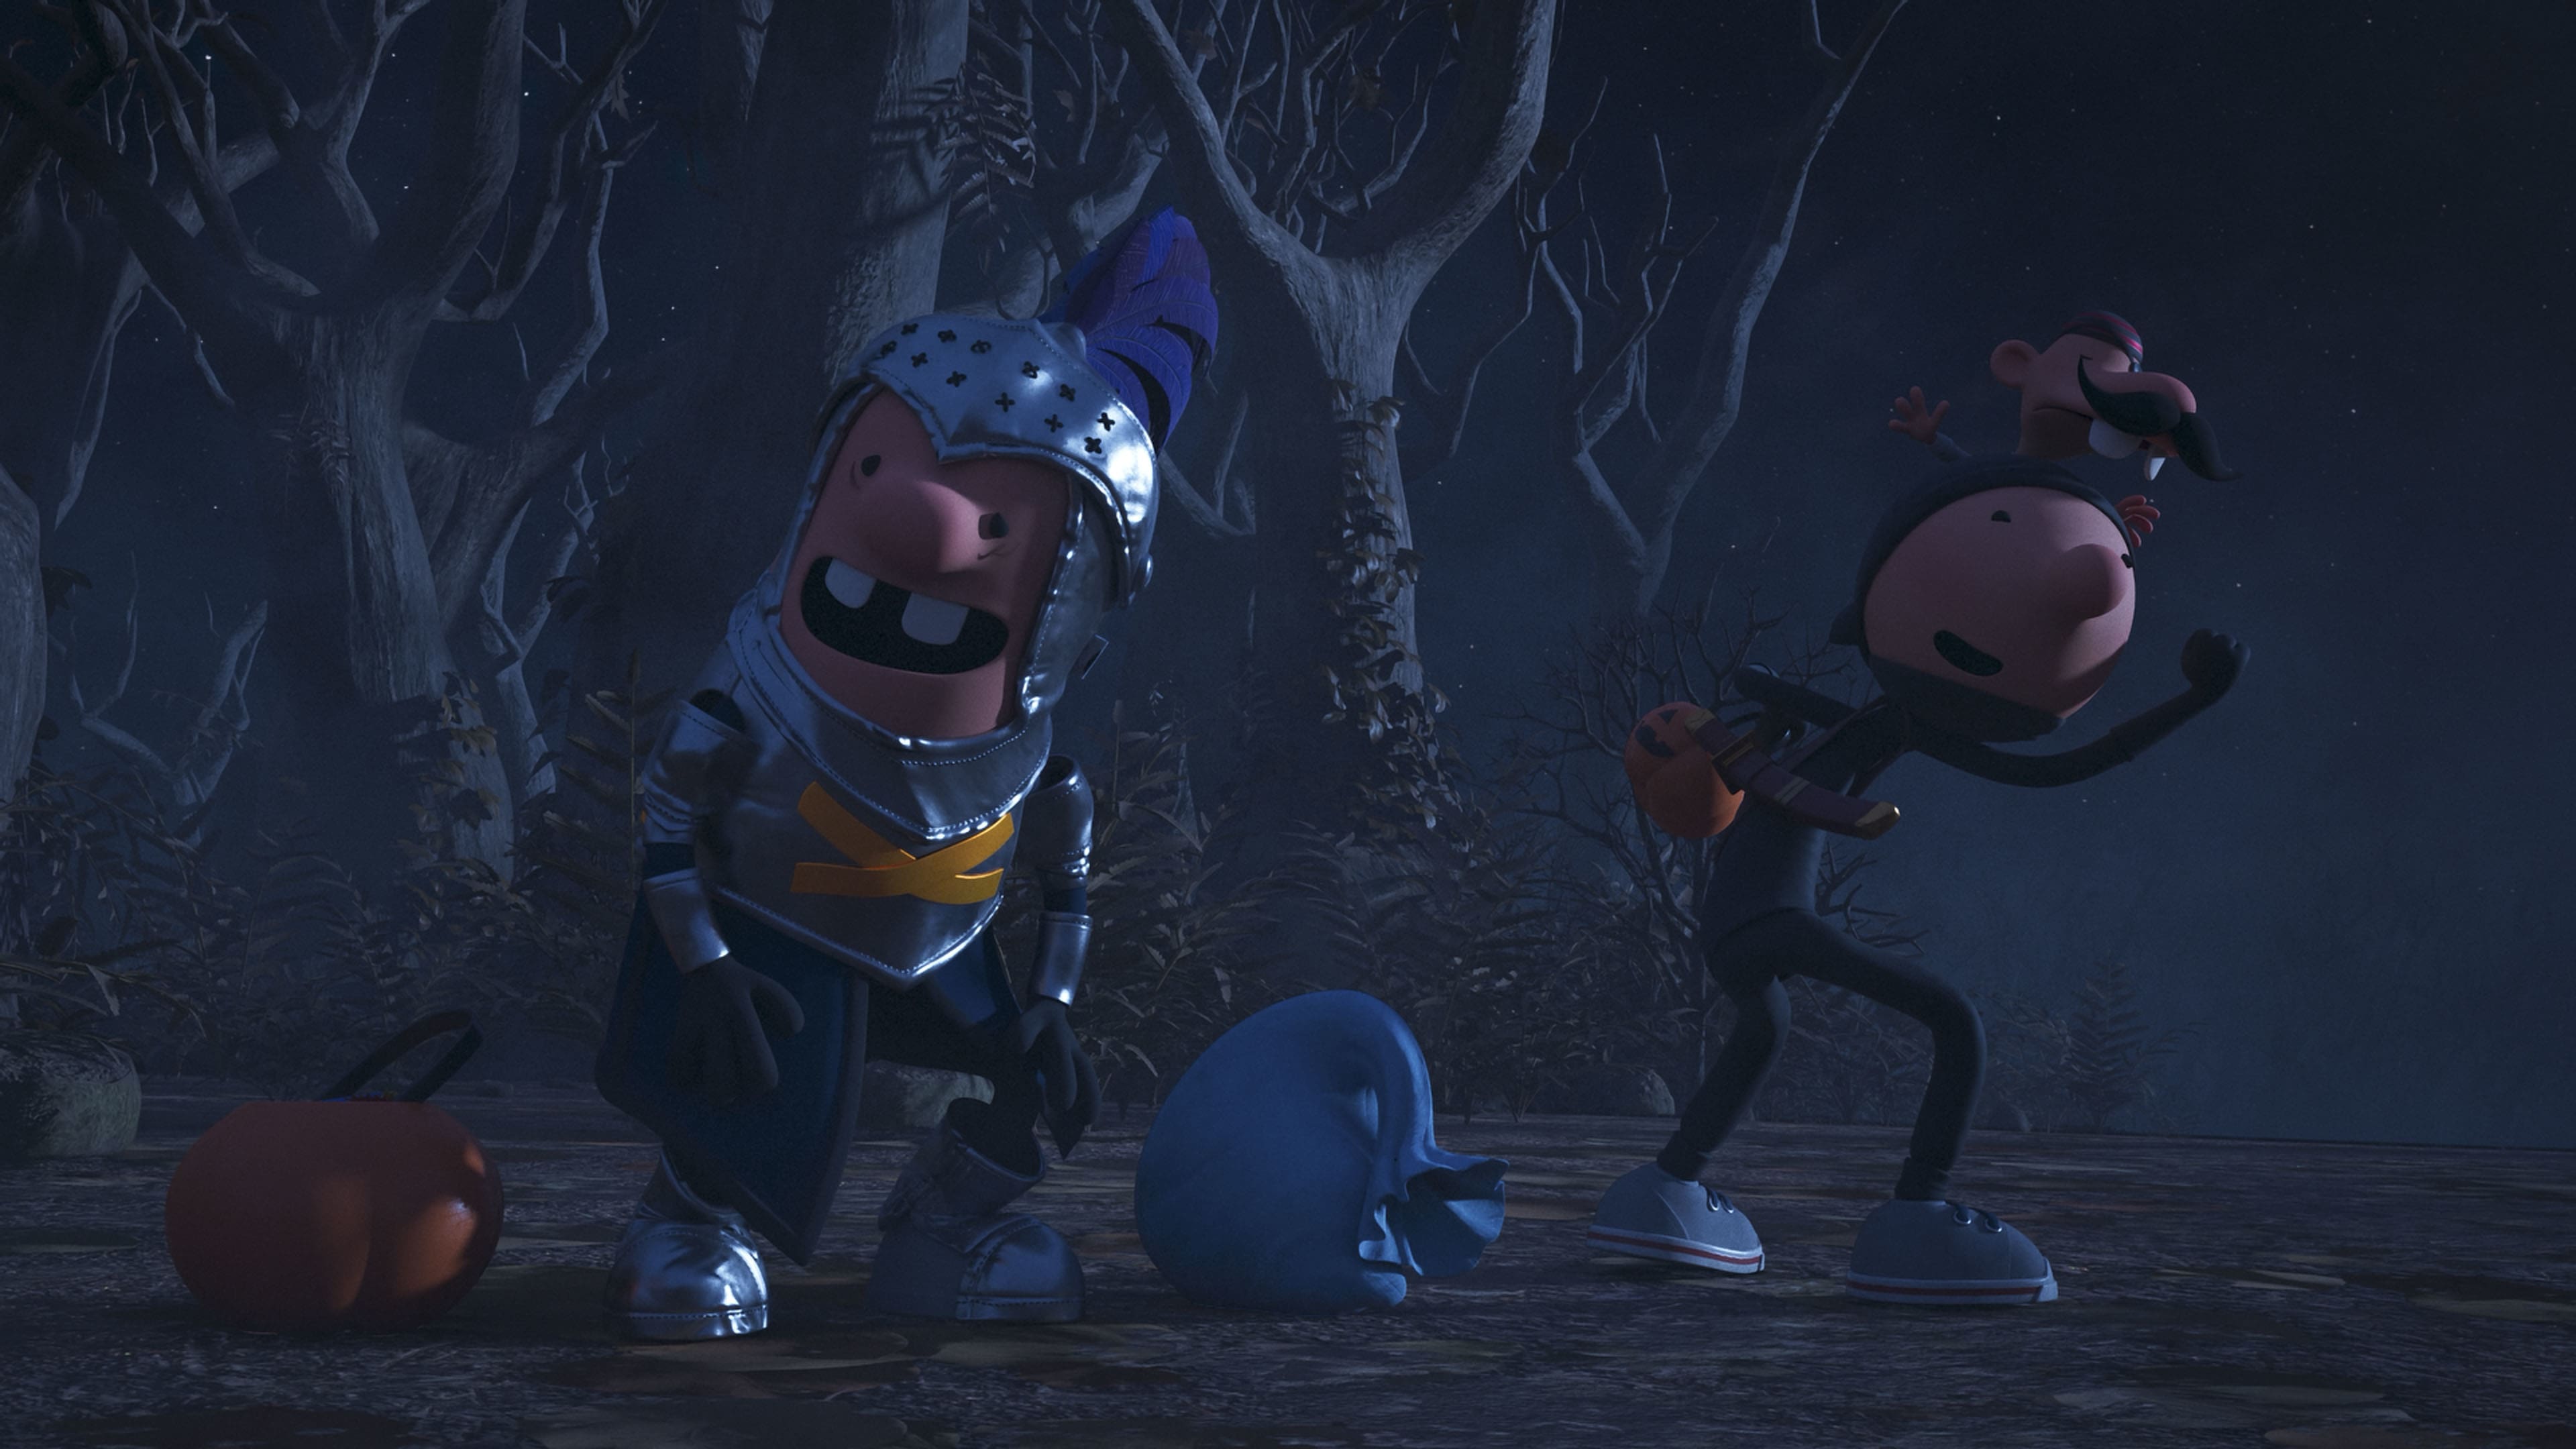  Rowley (voiced by Ethan William Childress) and Greg (voiced by Brady Noon) in 20th Century Studios' DIARY OF A WIMPY KID, exclusively on Disney+. 